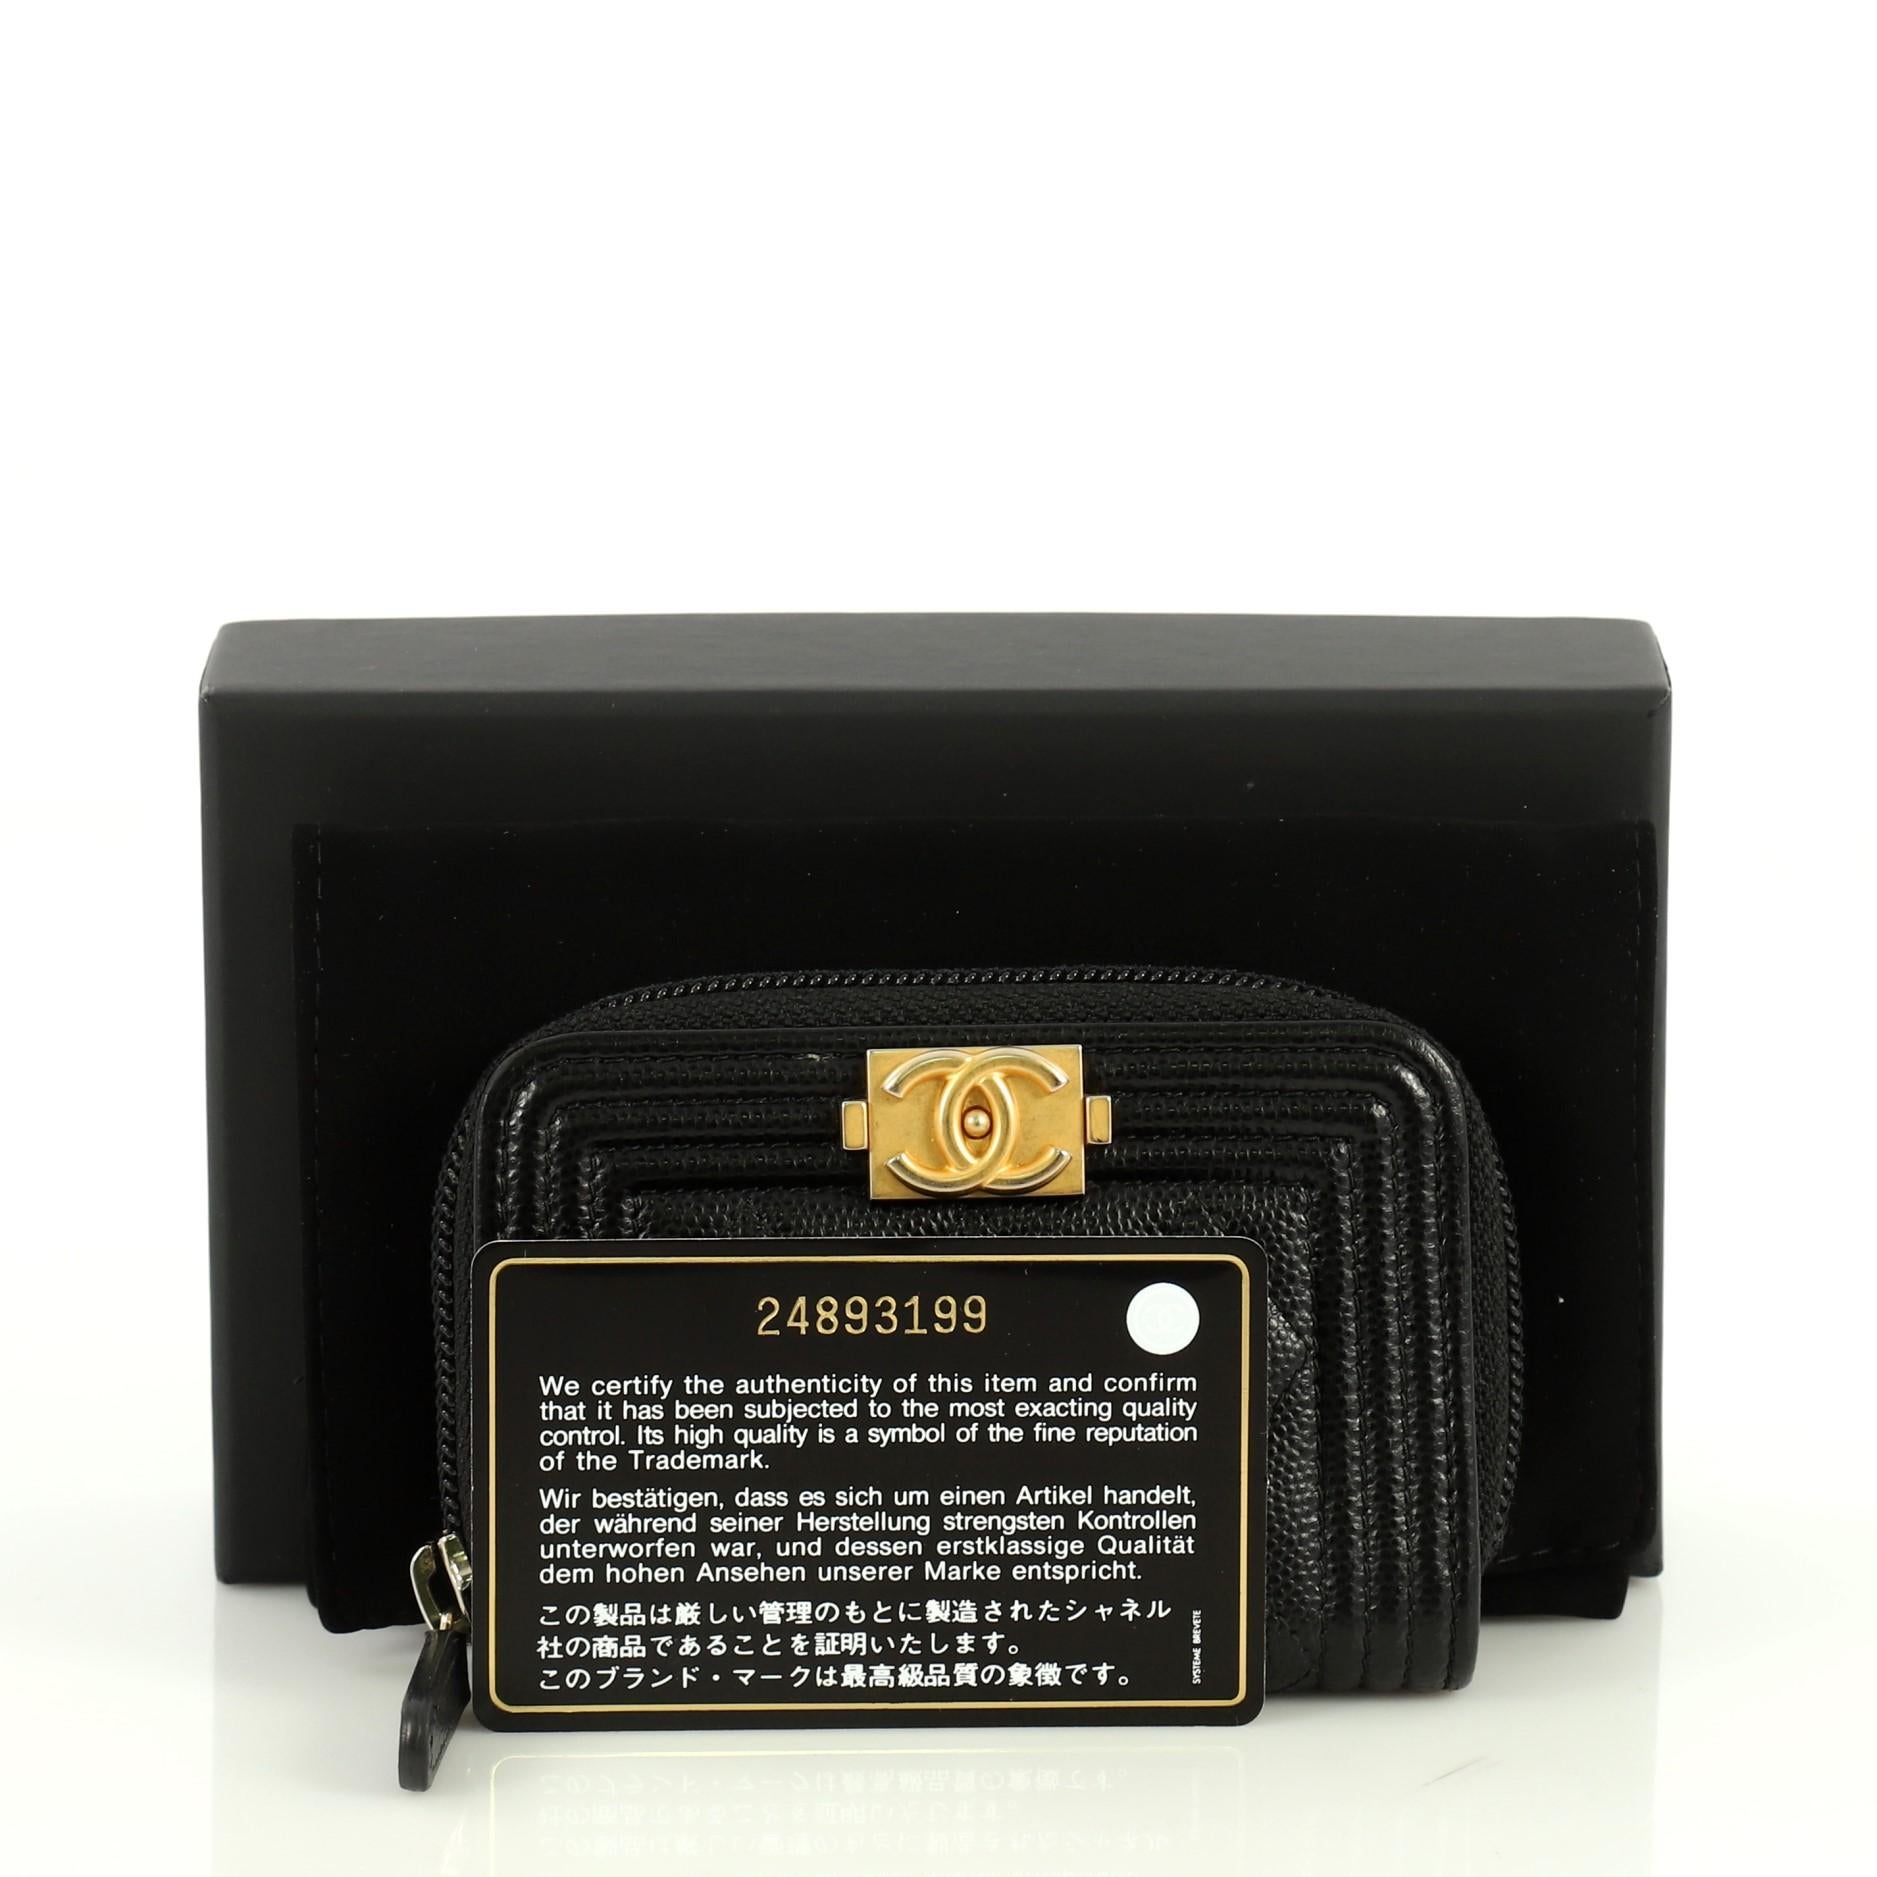 This Chanel Boy Zip Coin Purse Quilted Caviar Small, crafted from black quilted caviar leather, features CC Boy logo and gold-tone hardware. Its zip closure opens to a black fabric interior divided into three compartments. Hologram sticker reads: